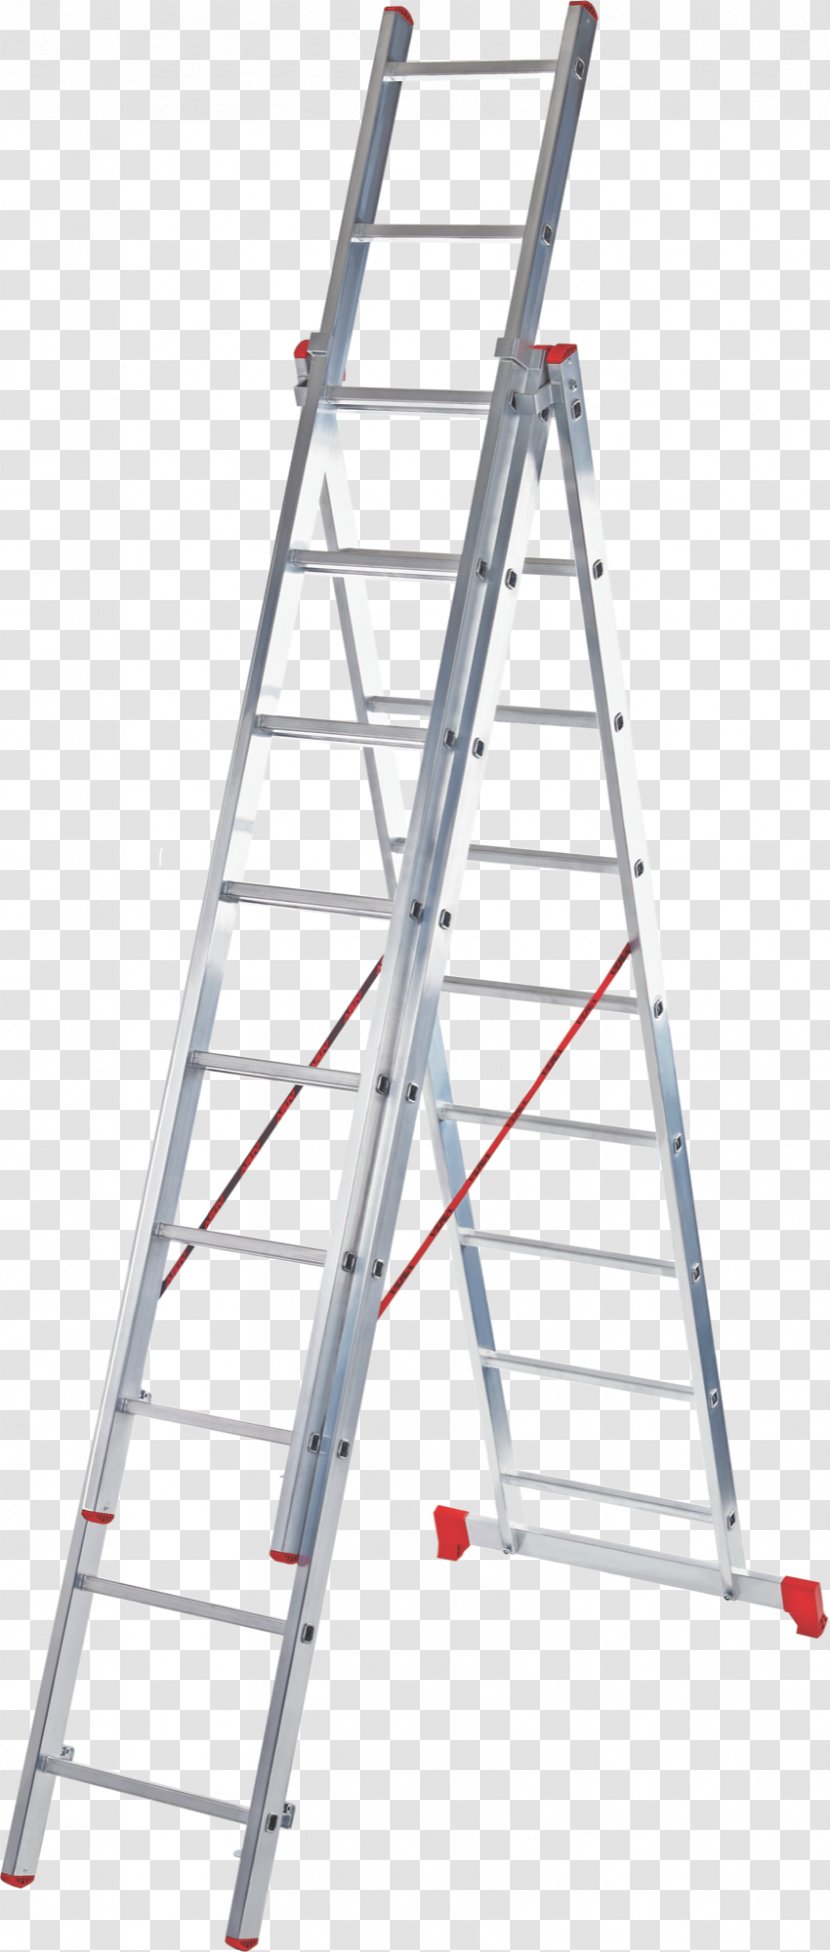 Ladder Tool Aluminium Scaffolding Zarges - Structure Transparent PNG